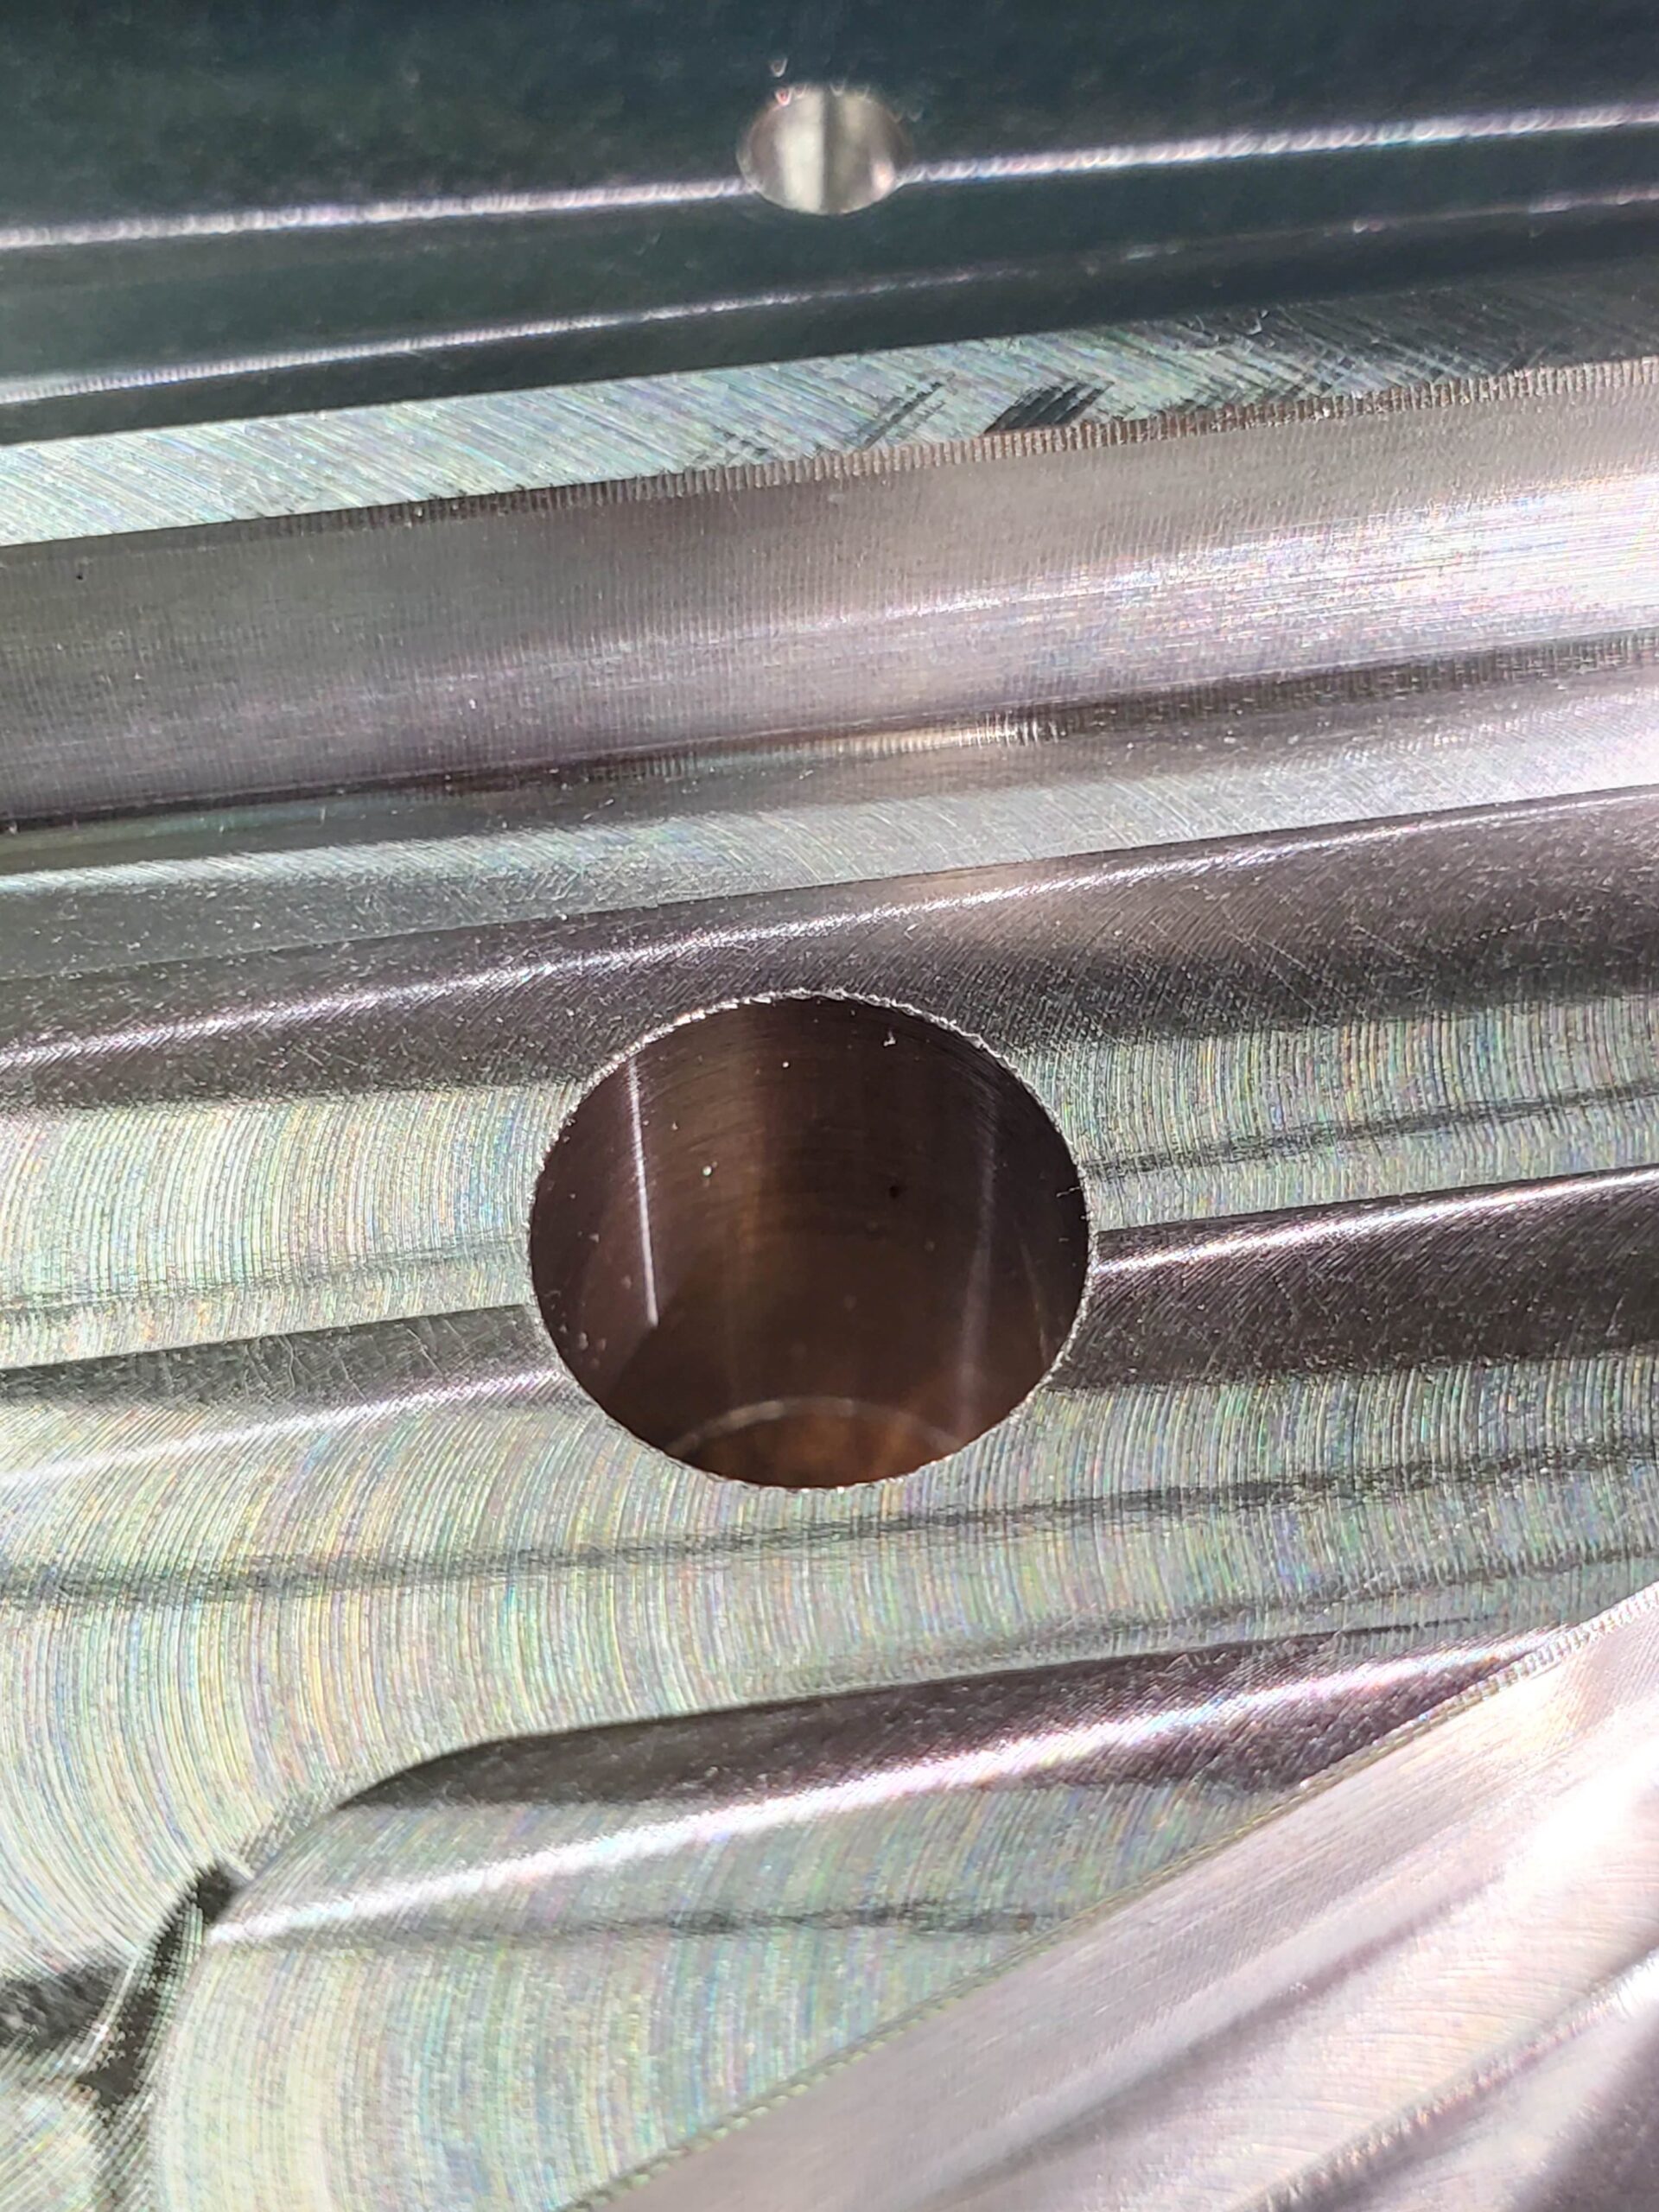 Close-up of a metallic surface with concentric ridges and a central circular hole, showing detailed machining work.